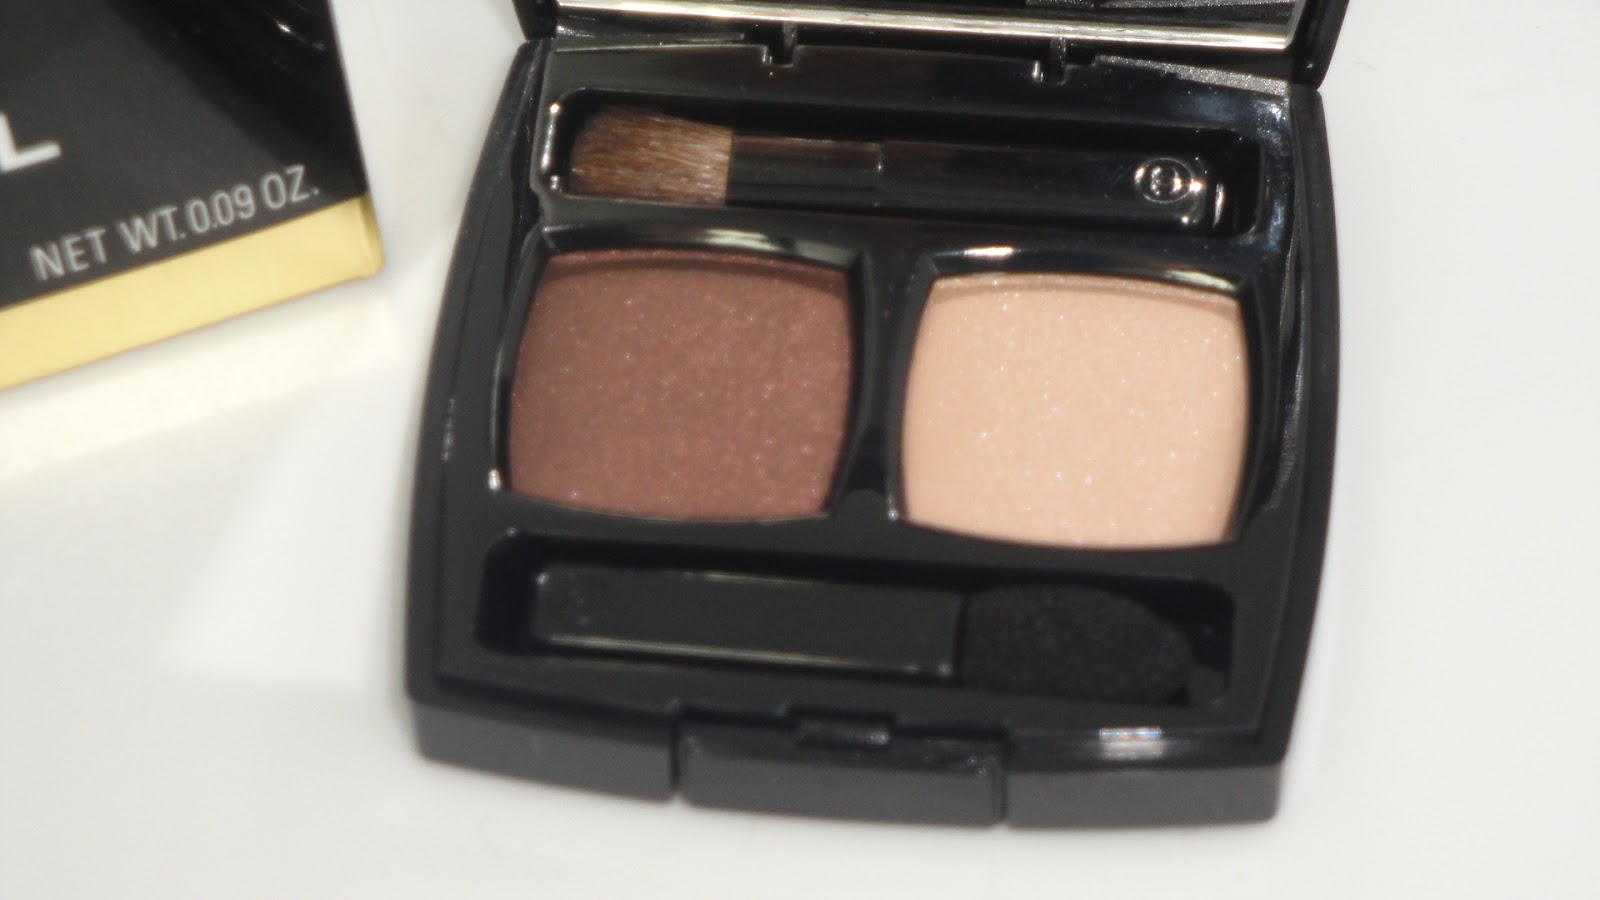 Pin on CHANEL MAKEUP AND BEAUTY PRODUCTS